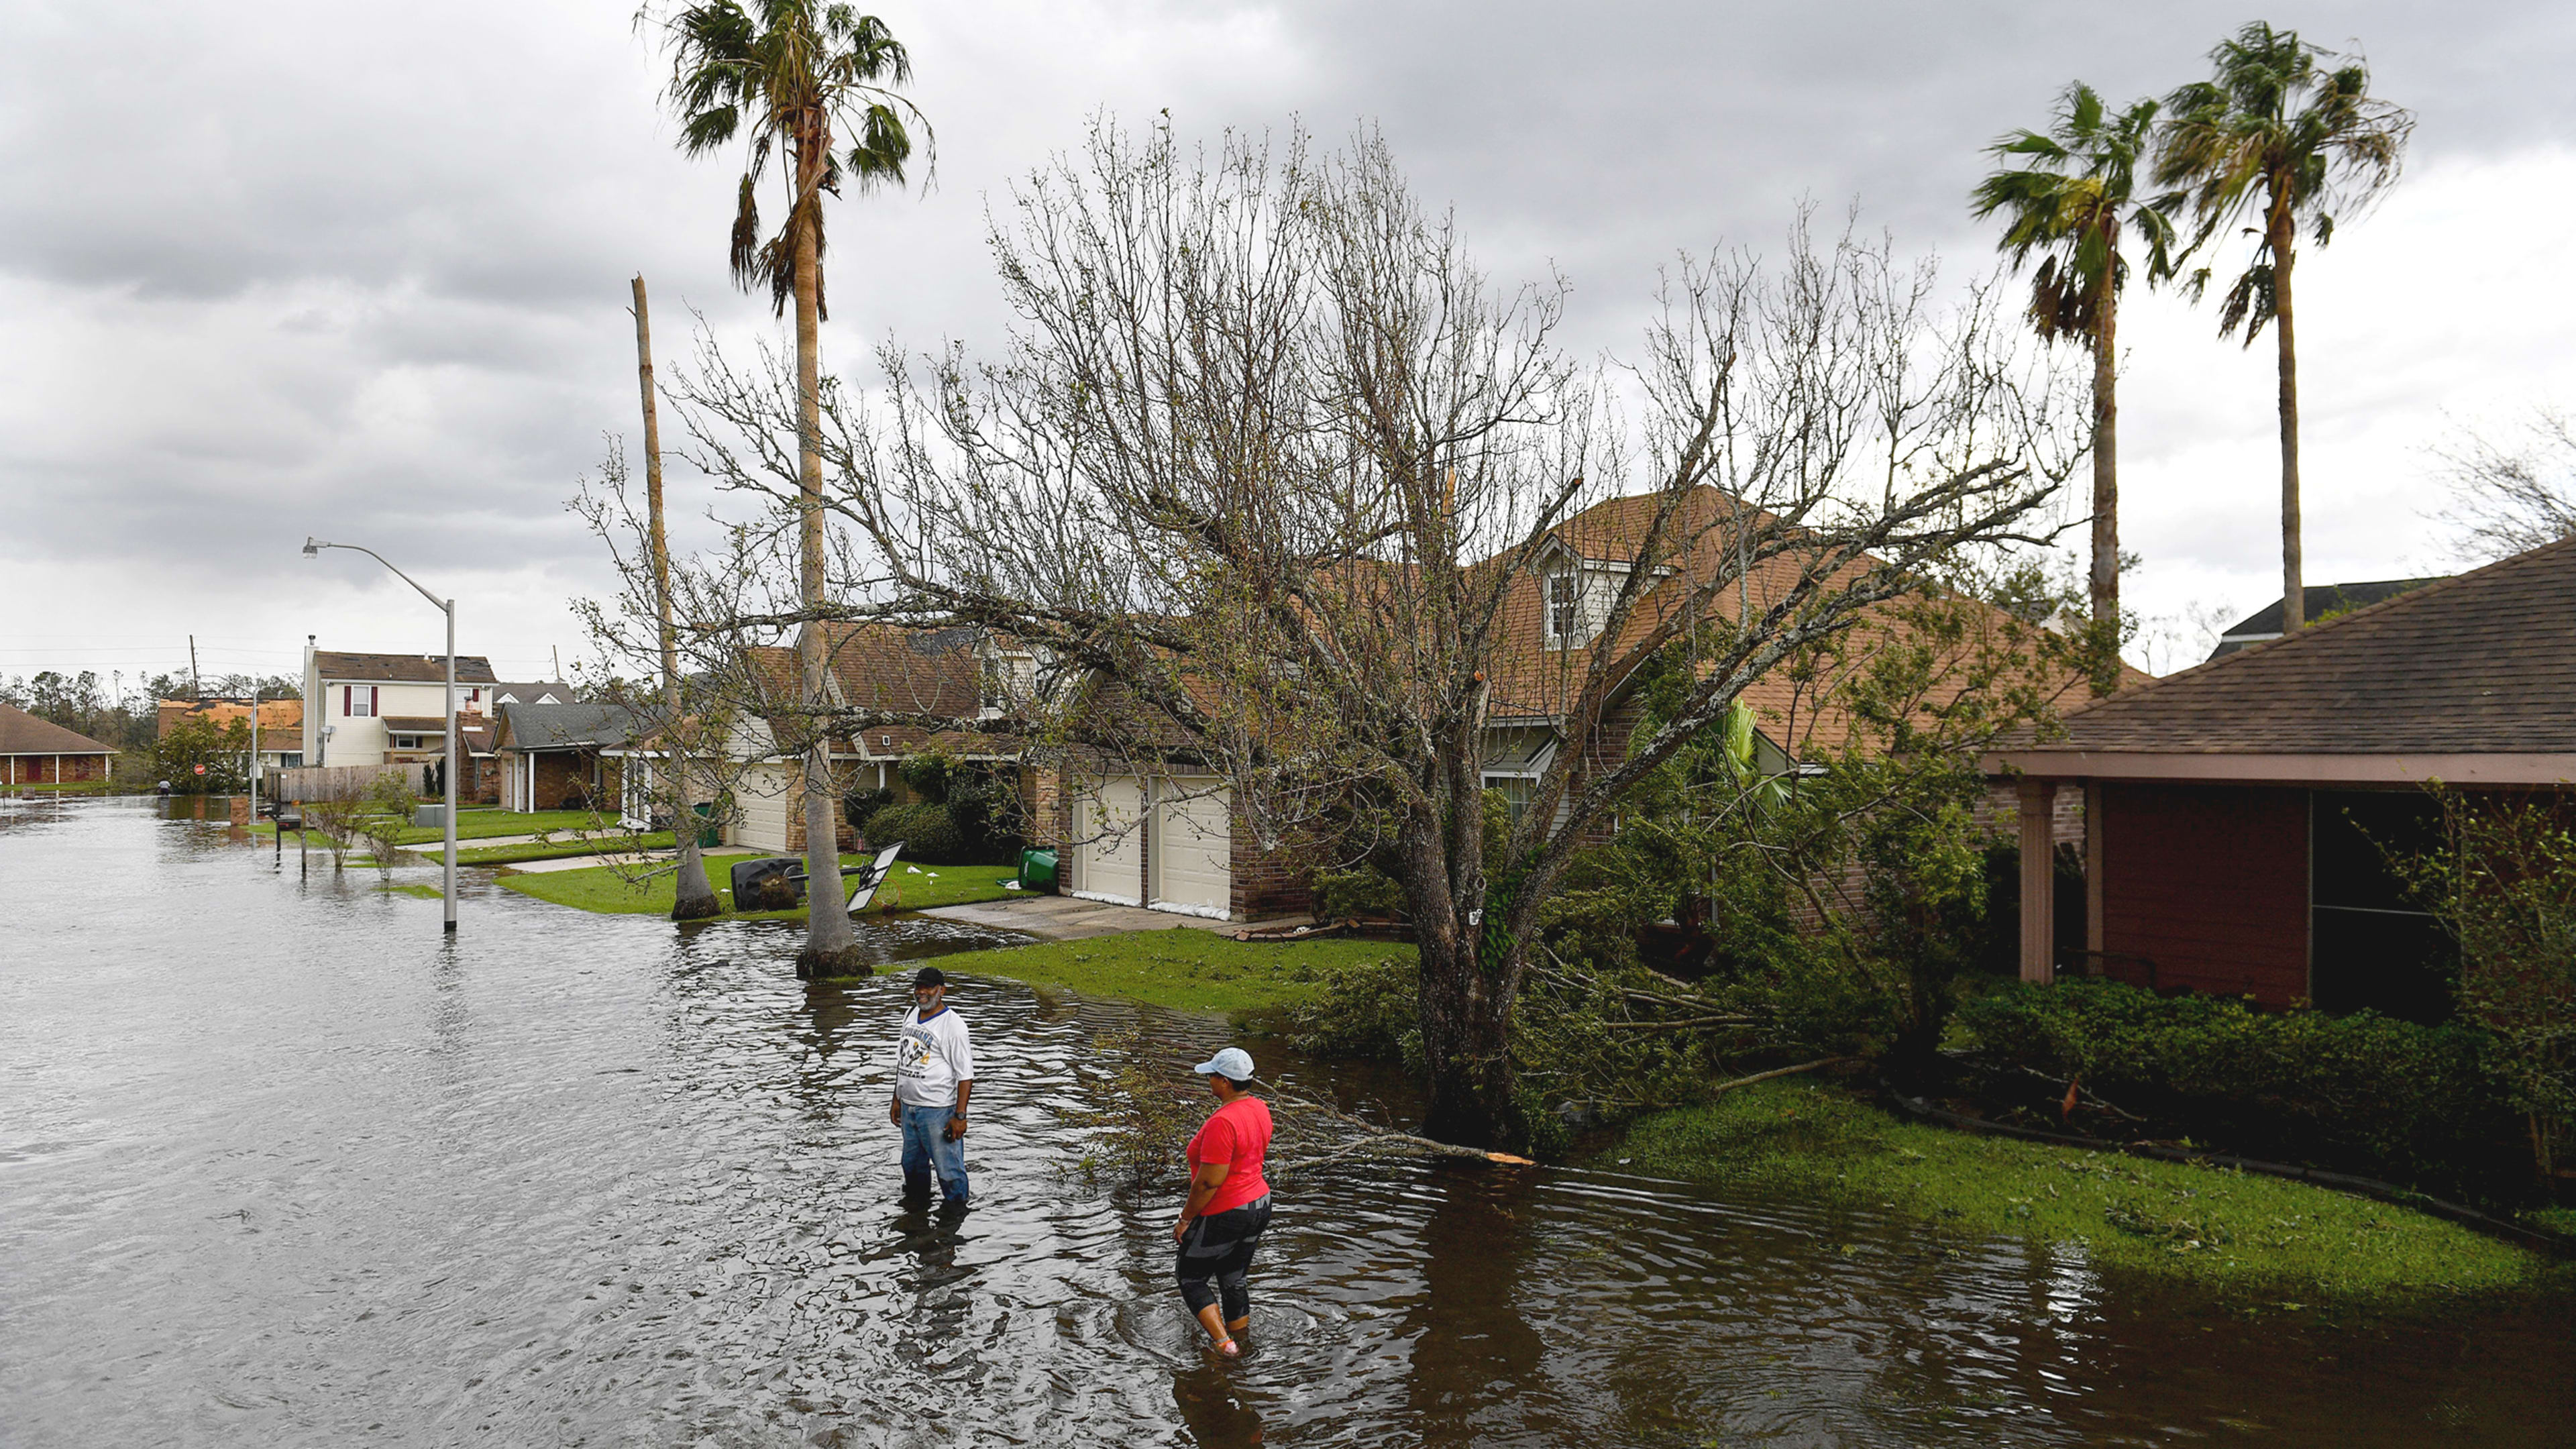 How to help Hurricane Ida victims: 4 things you can do right now, from GoFundMe to local charities